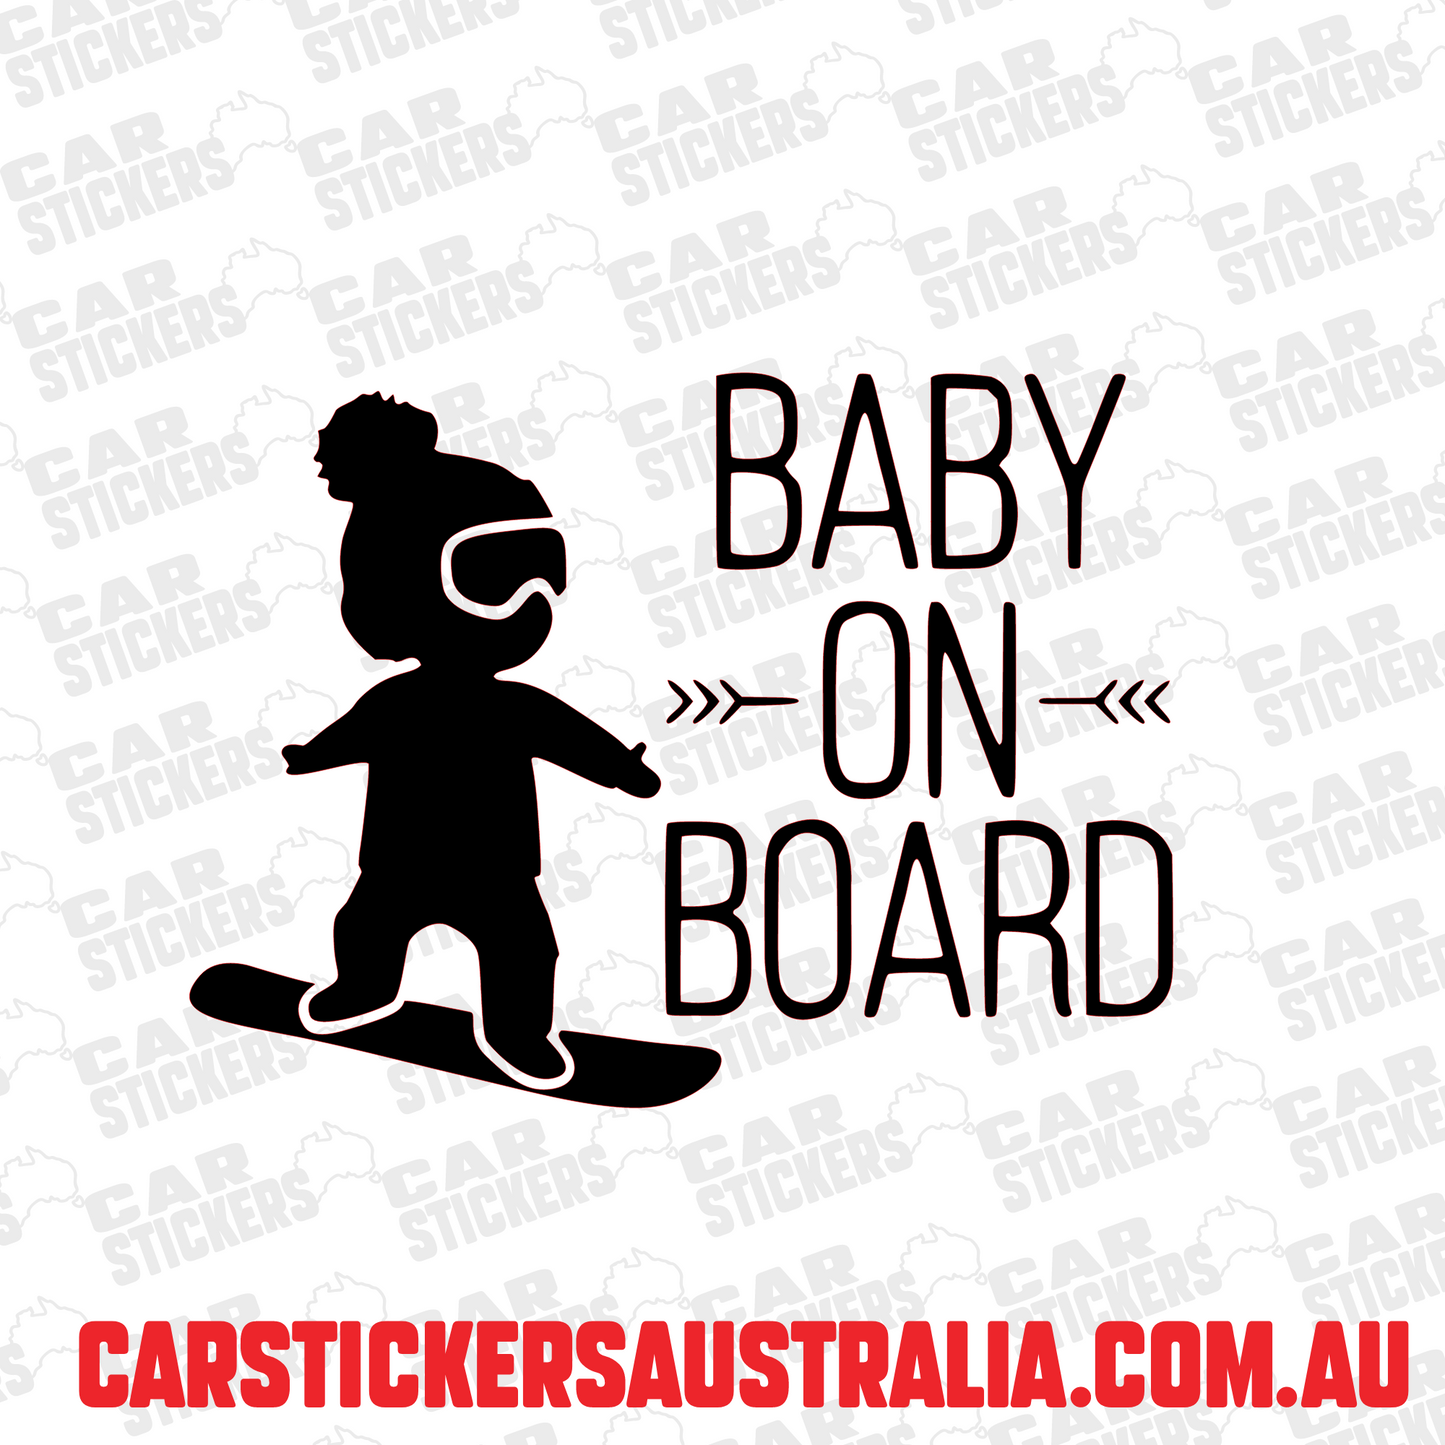 Baby Snowboarder On Board